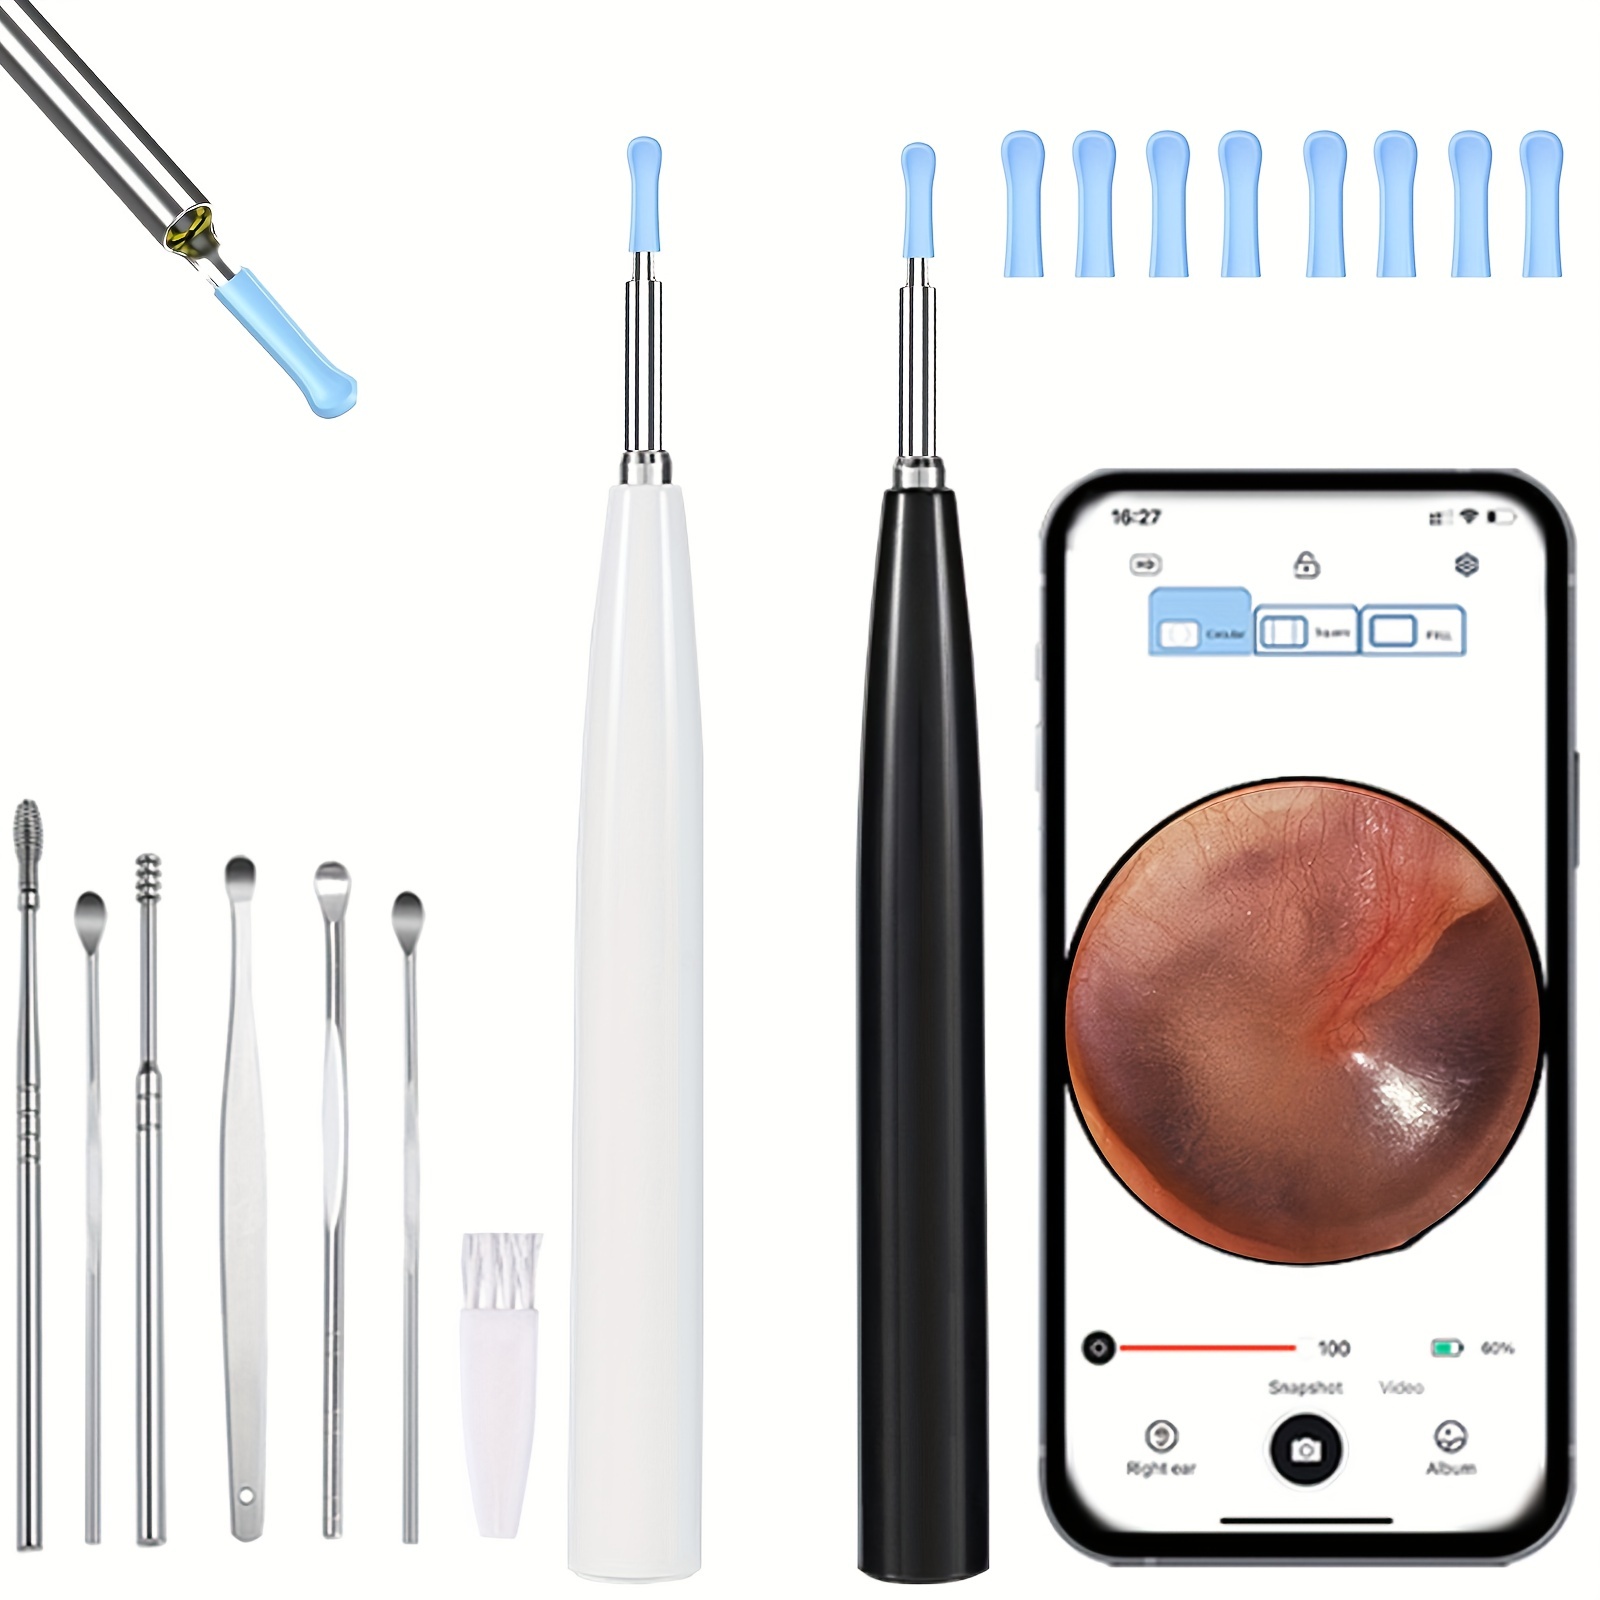 LMECHN Ear Wax Removal Kit 1920P HD, Wifi Ear Cleaner Camera Diameter 3mm,  Earwax Remover Tool with 6 Ear Spoon, Ear Camera with